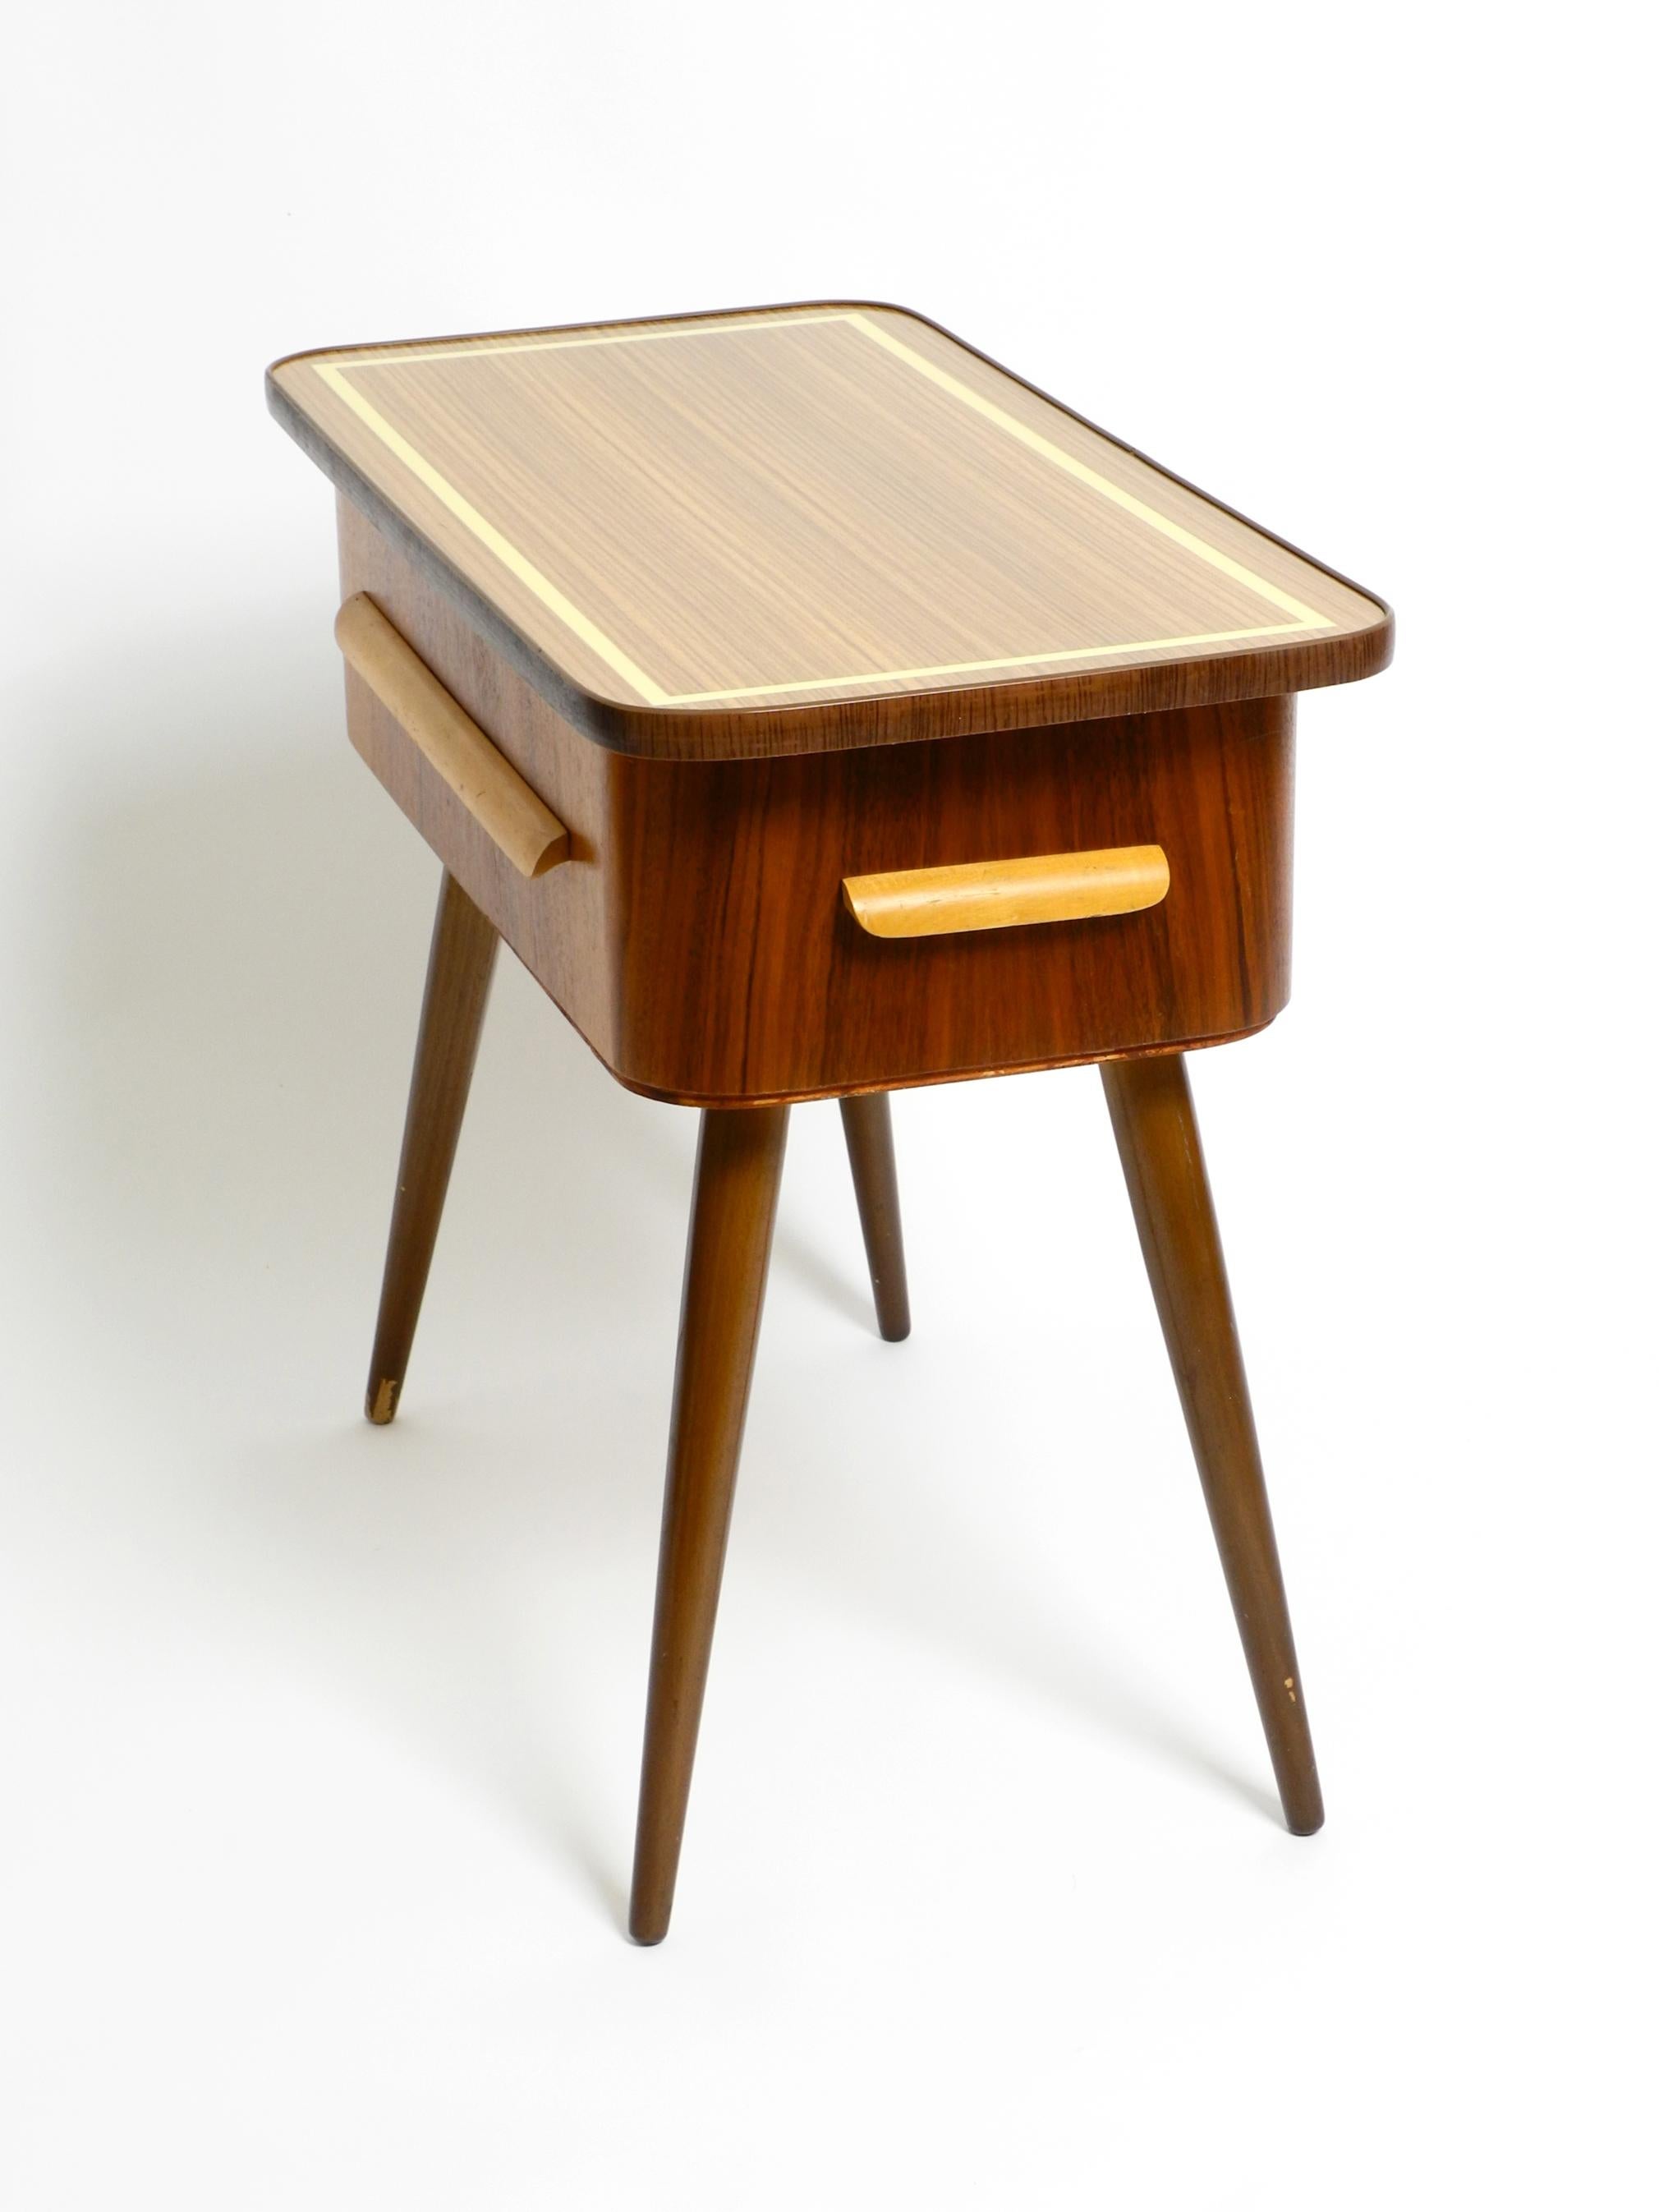 Beautiful Original 1950s Sewing Box with Teak Veneer with Hinged Table Top For Sale 9